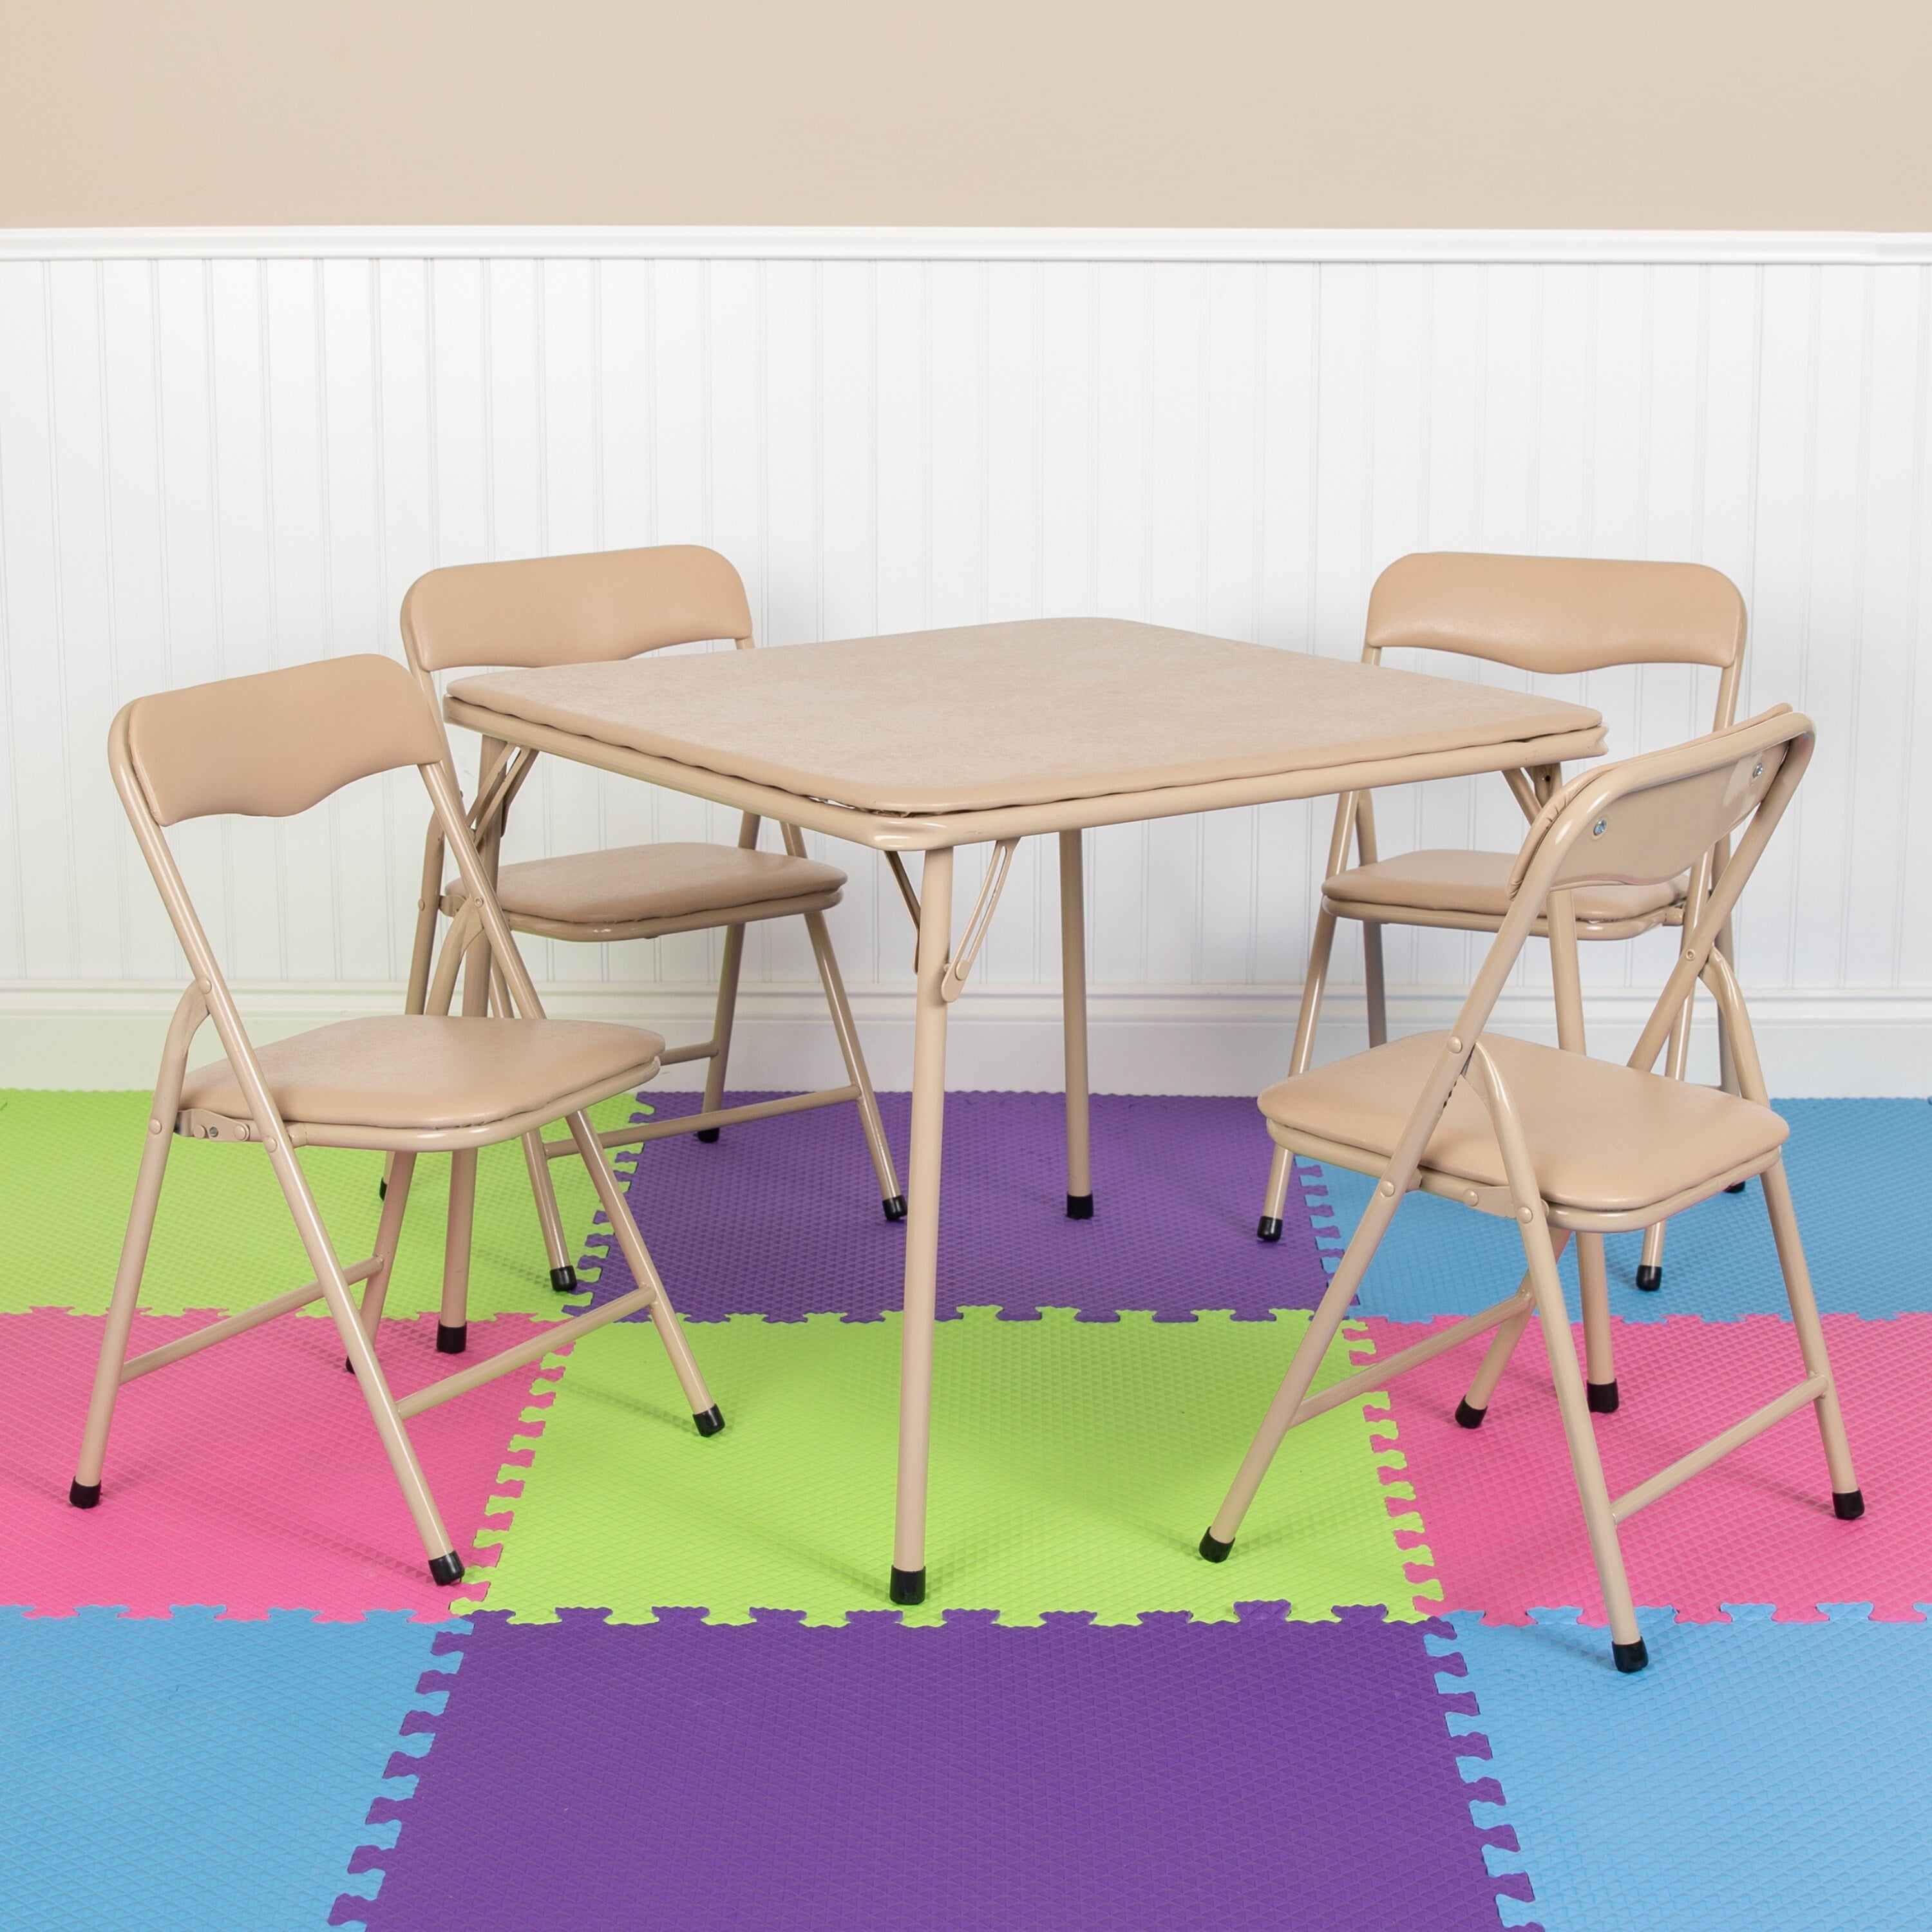 Lancaster Home Kids 5 Piece Folding Table and Chair Set - Kids Activity